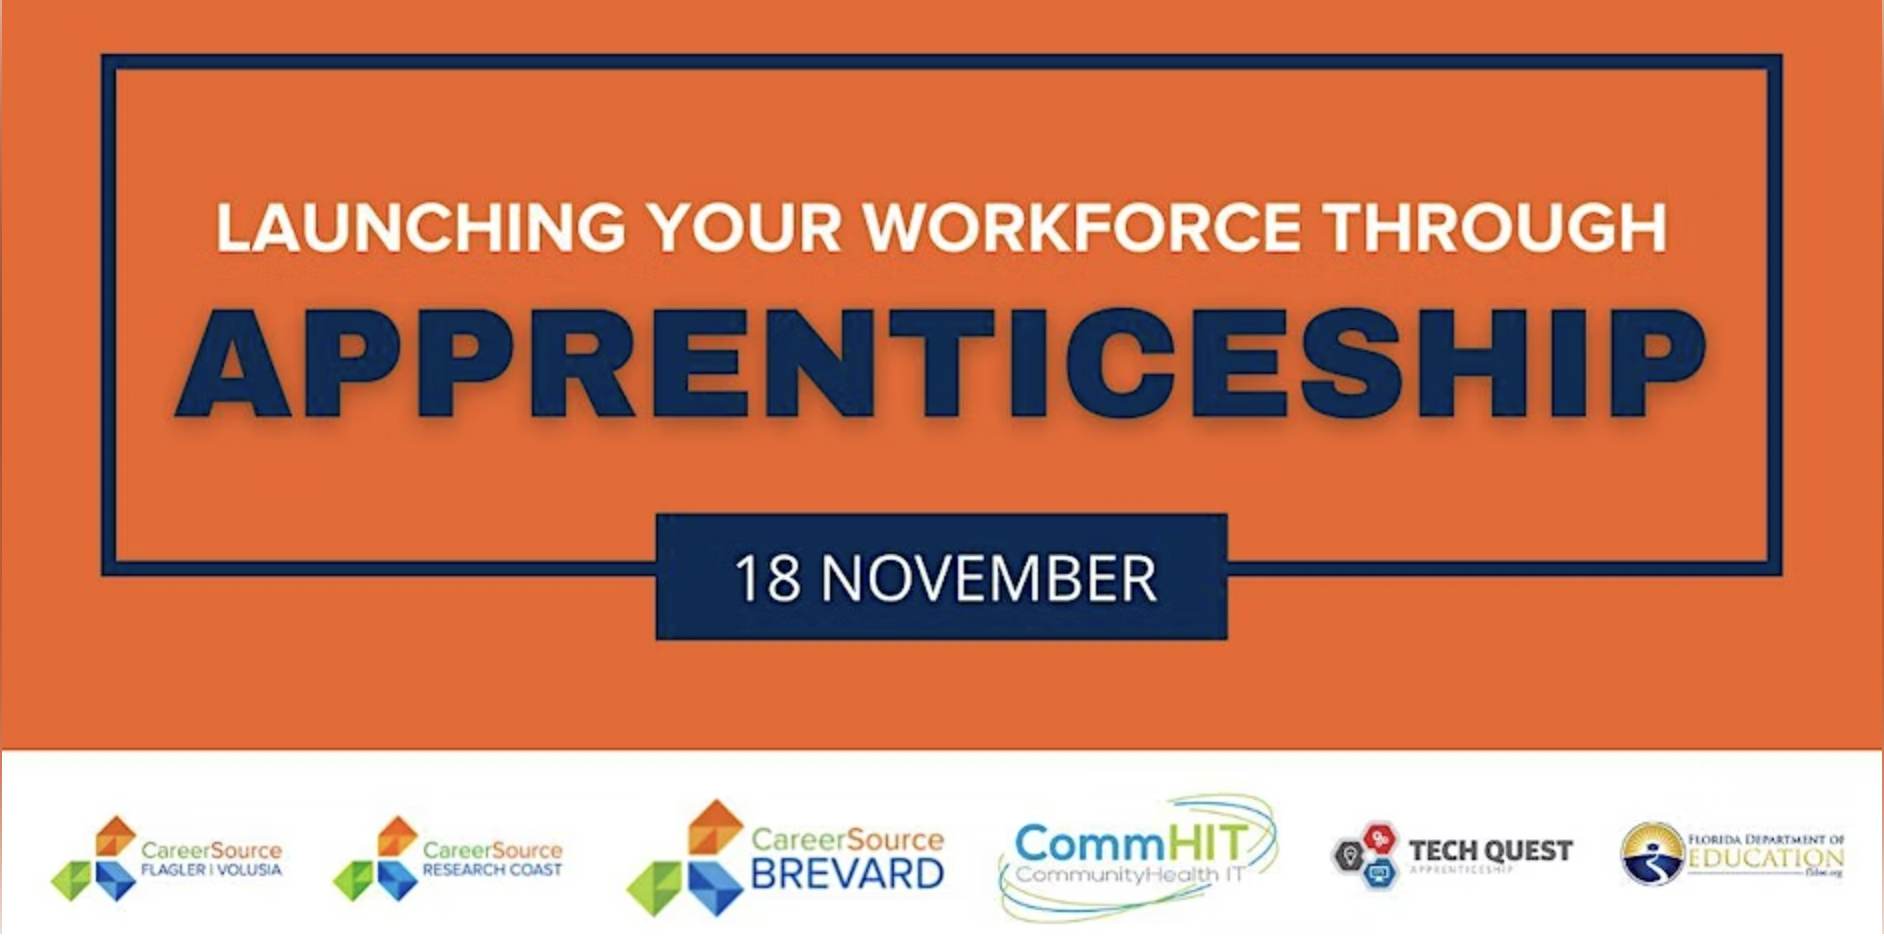 Launching Your Workforce through Apprenticeships